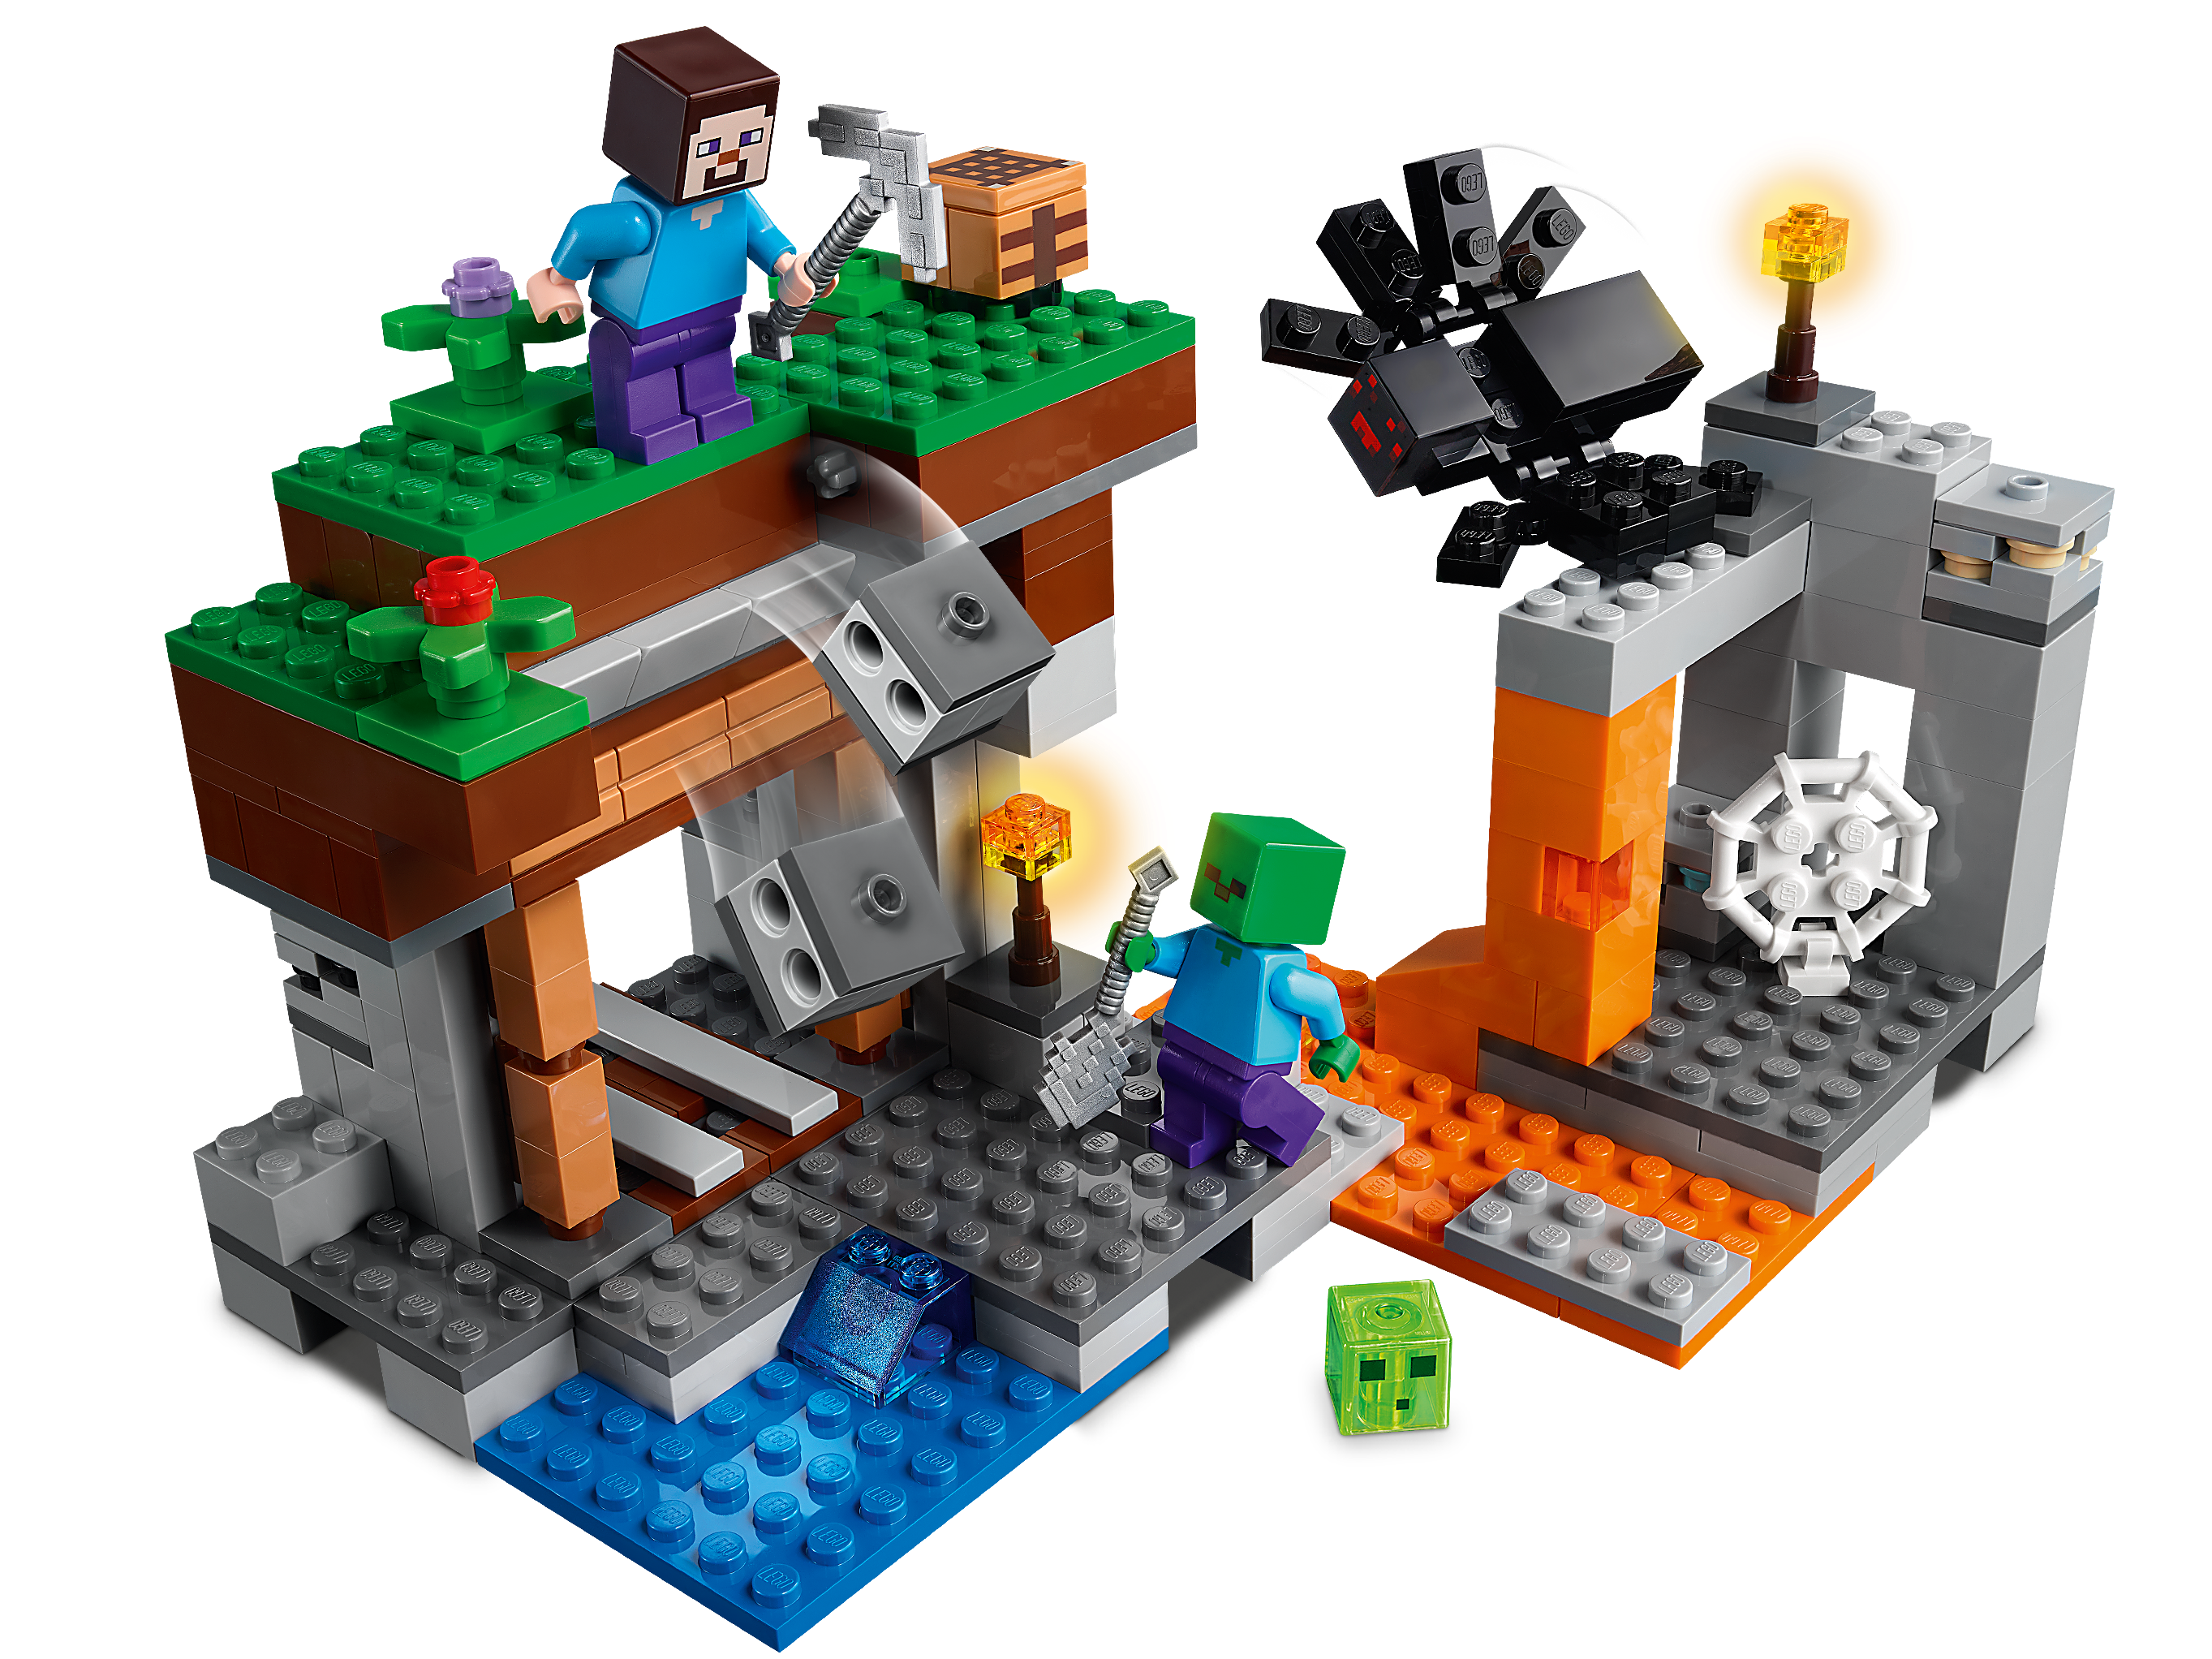 LEGO Minecraft The Abandoned Mine Building Toy, 21166 Zombie Cave with  Slime, Steve & Spider Figures, Gift idea for Kids, Boys and Girls Age 7 plus